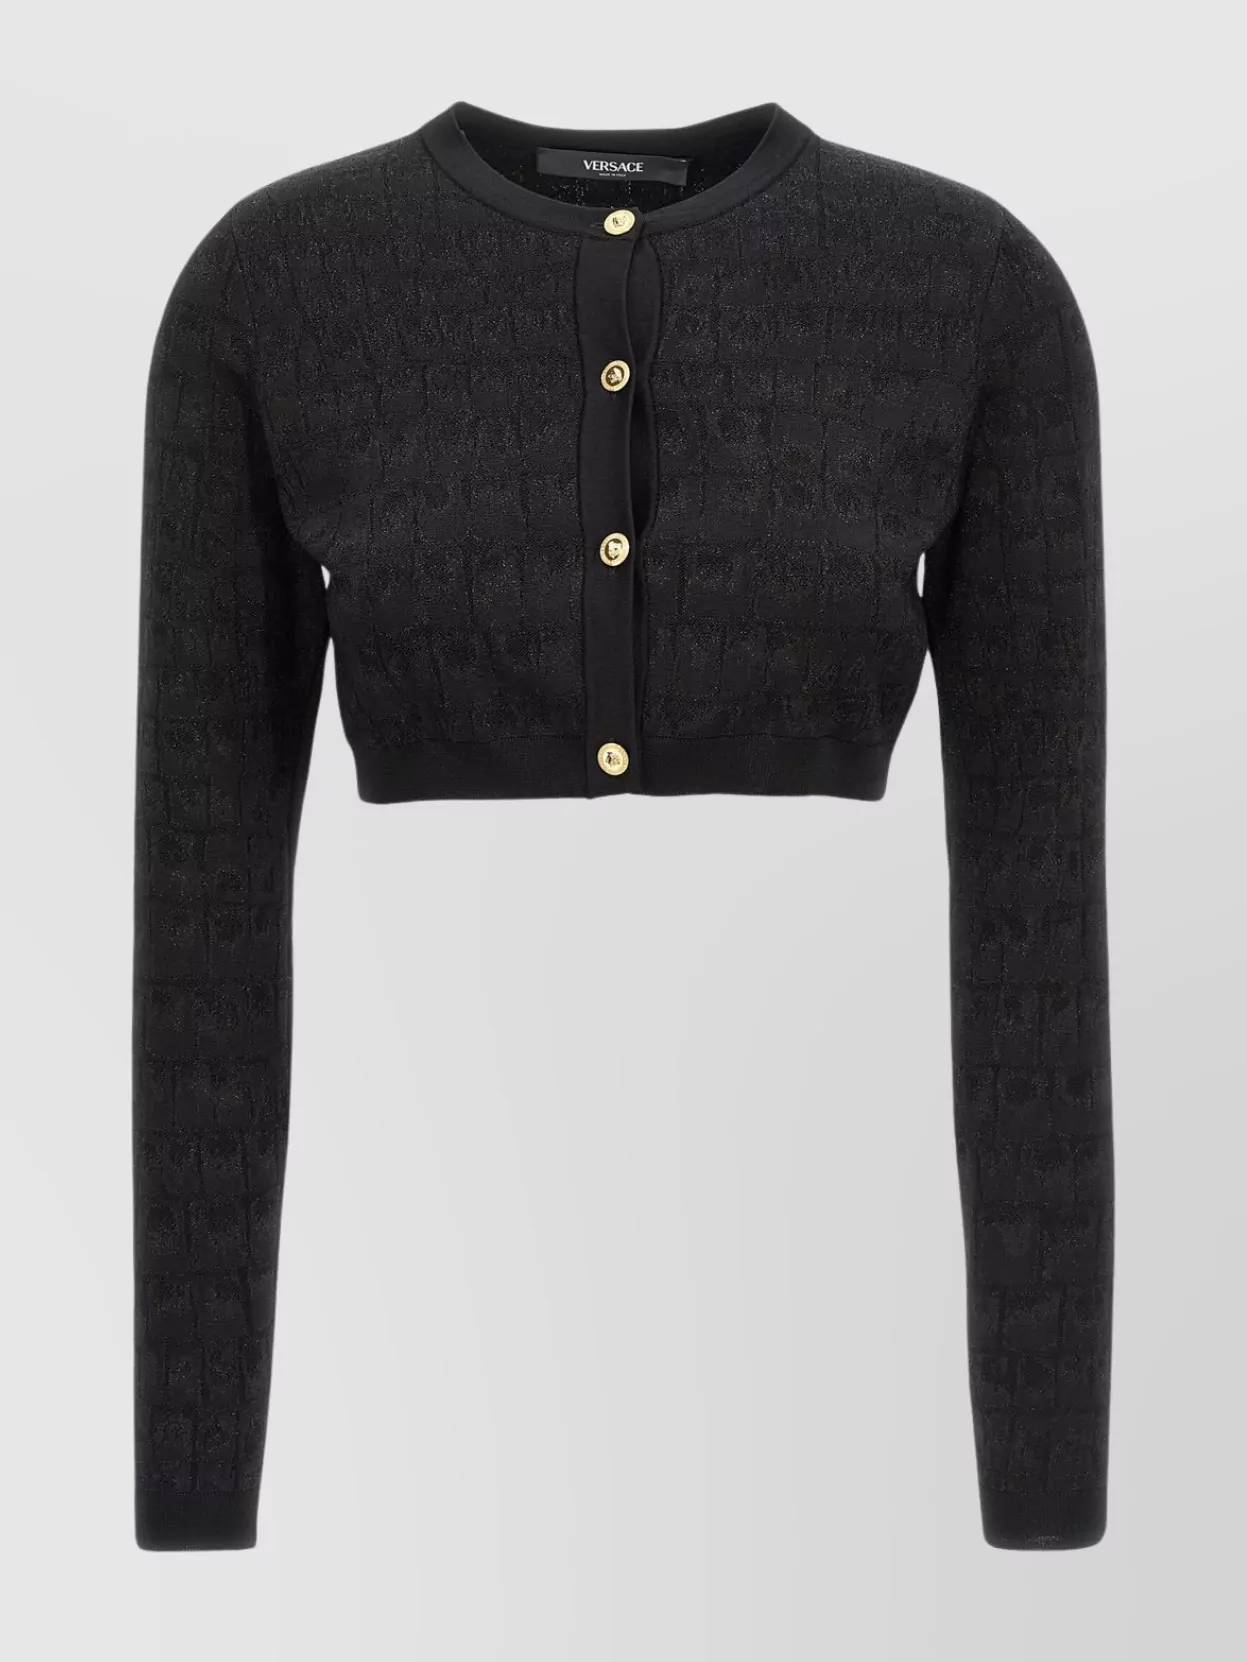 Versace Cropped Knit Cardigan Textured Pattern In Black